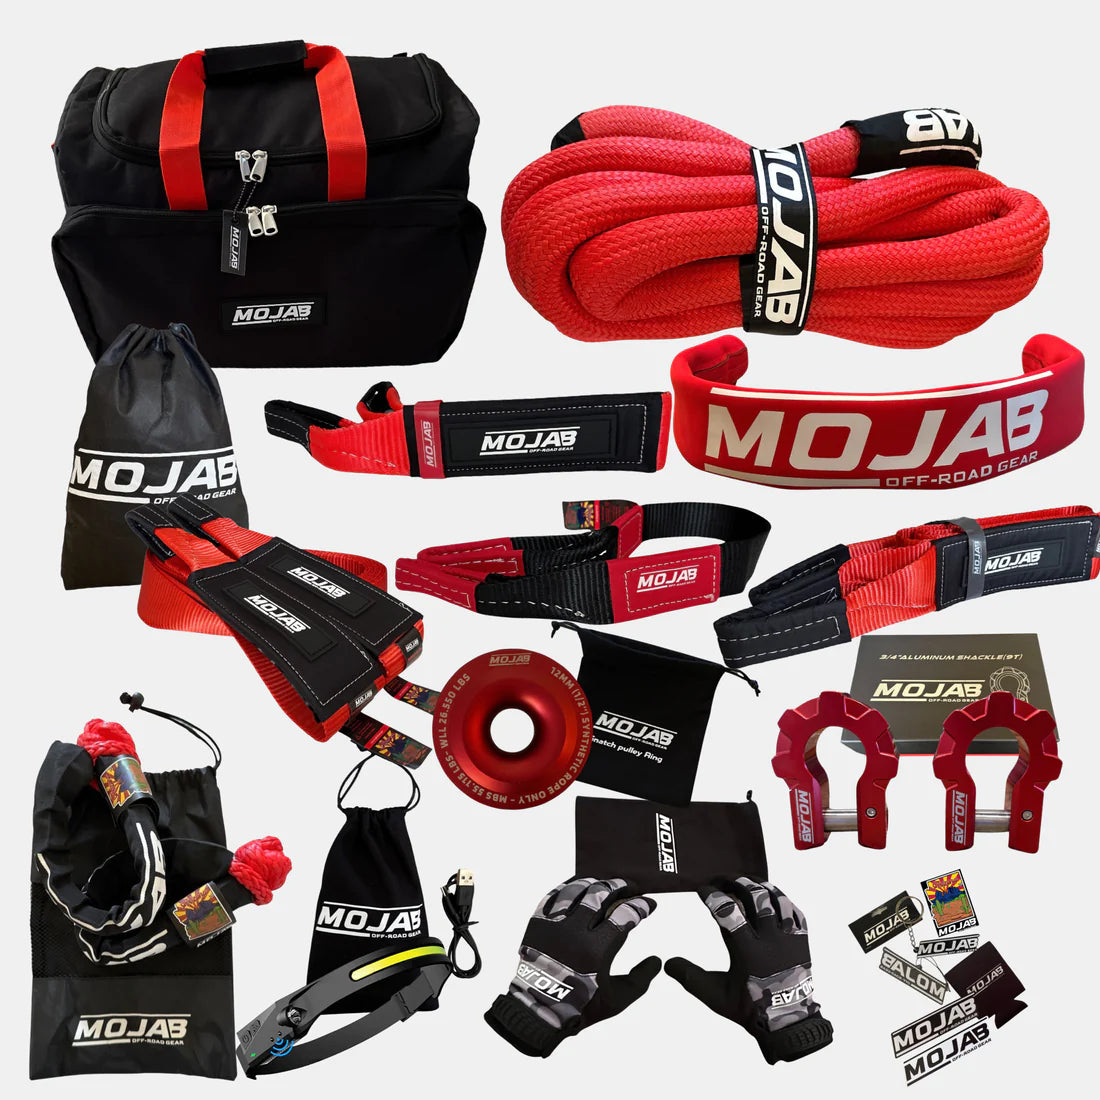 MOJAB OFFROAD Extreme Recovery Kit (14 items + 9 storage bags + 4 Velcro tapes) *Lifetime Warranty